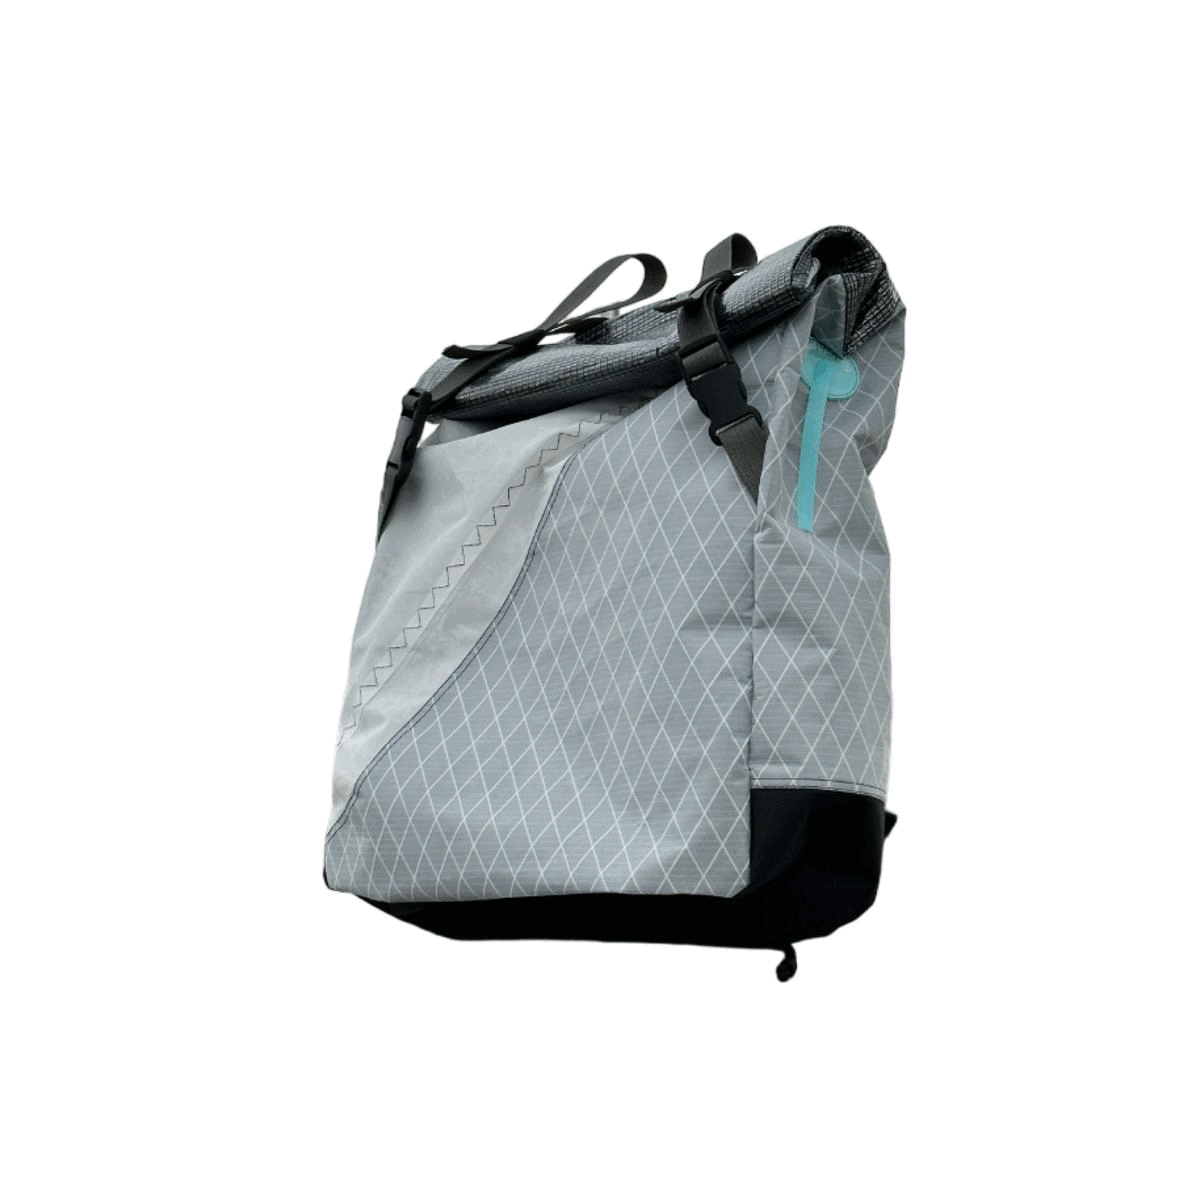 Designer daily roll backpacks / Urban roll-top bag from REwind brand